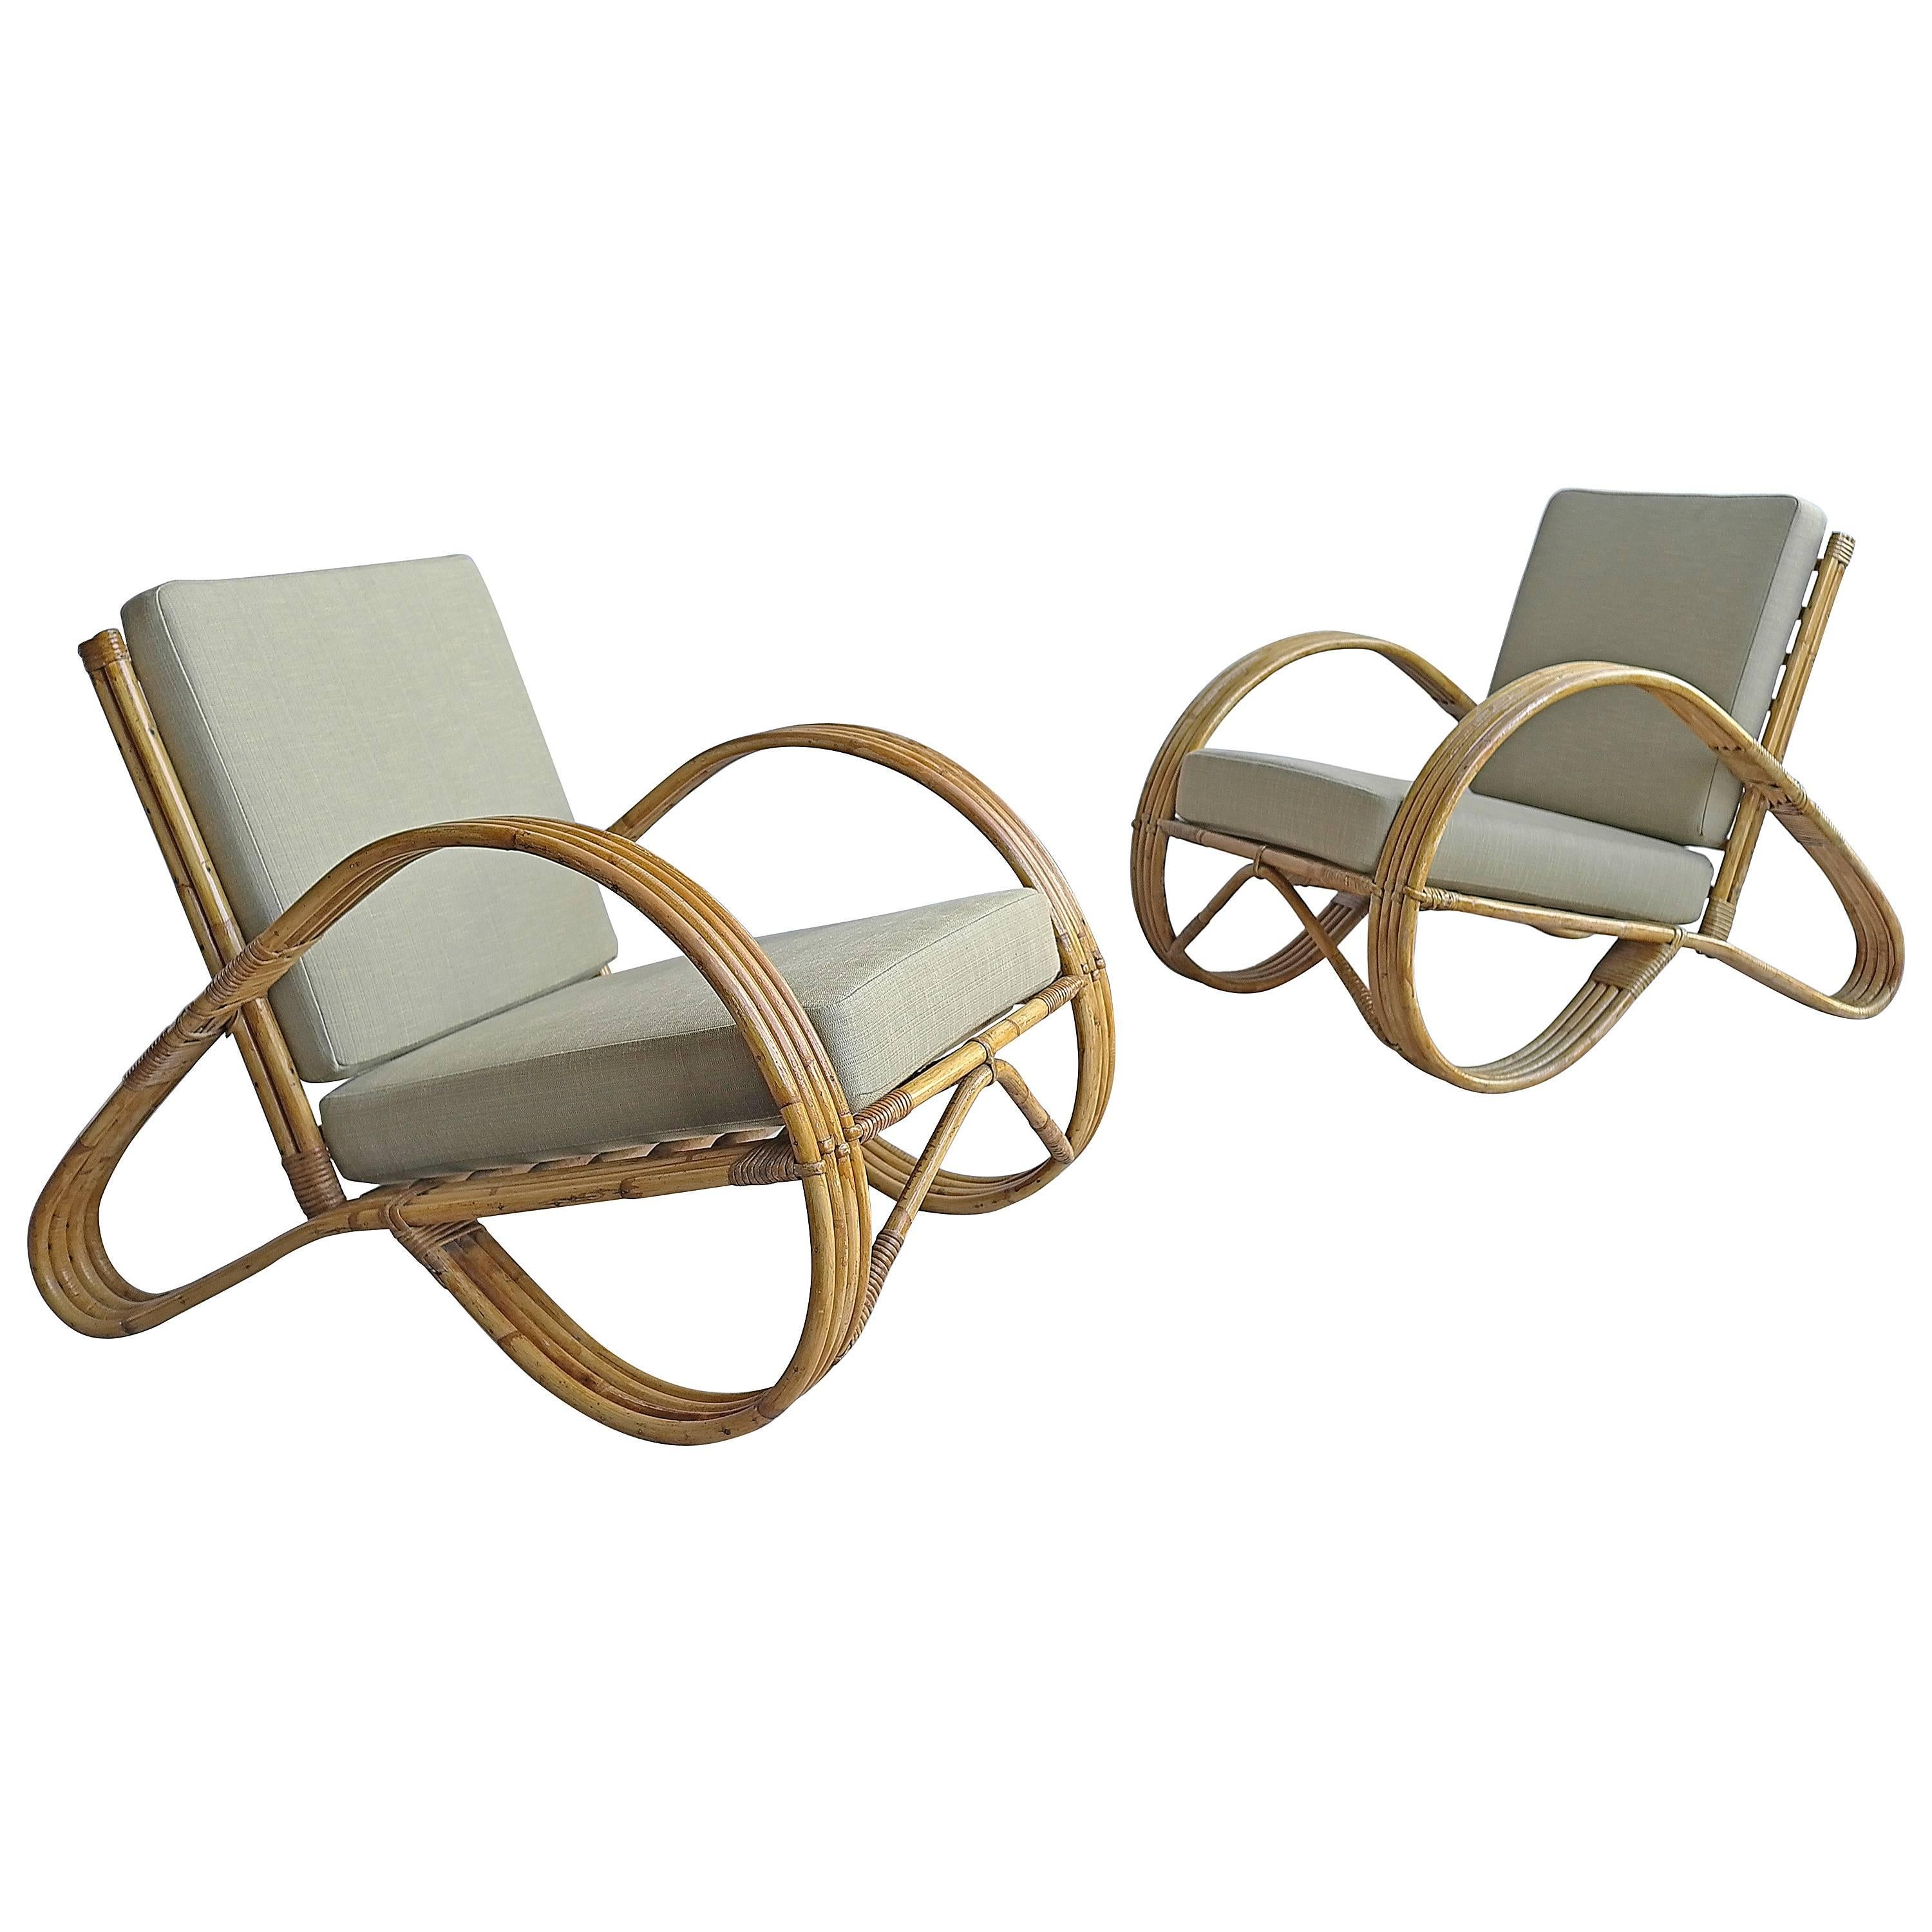 Pair of Sculptural Bamboo Armchairs with Green Fabric, 1950s